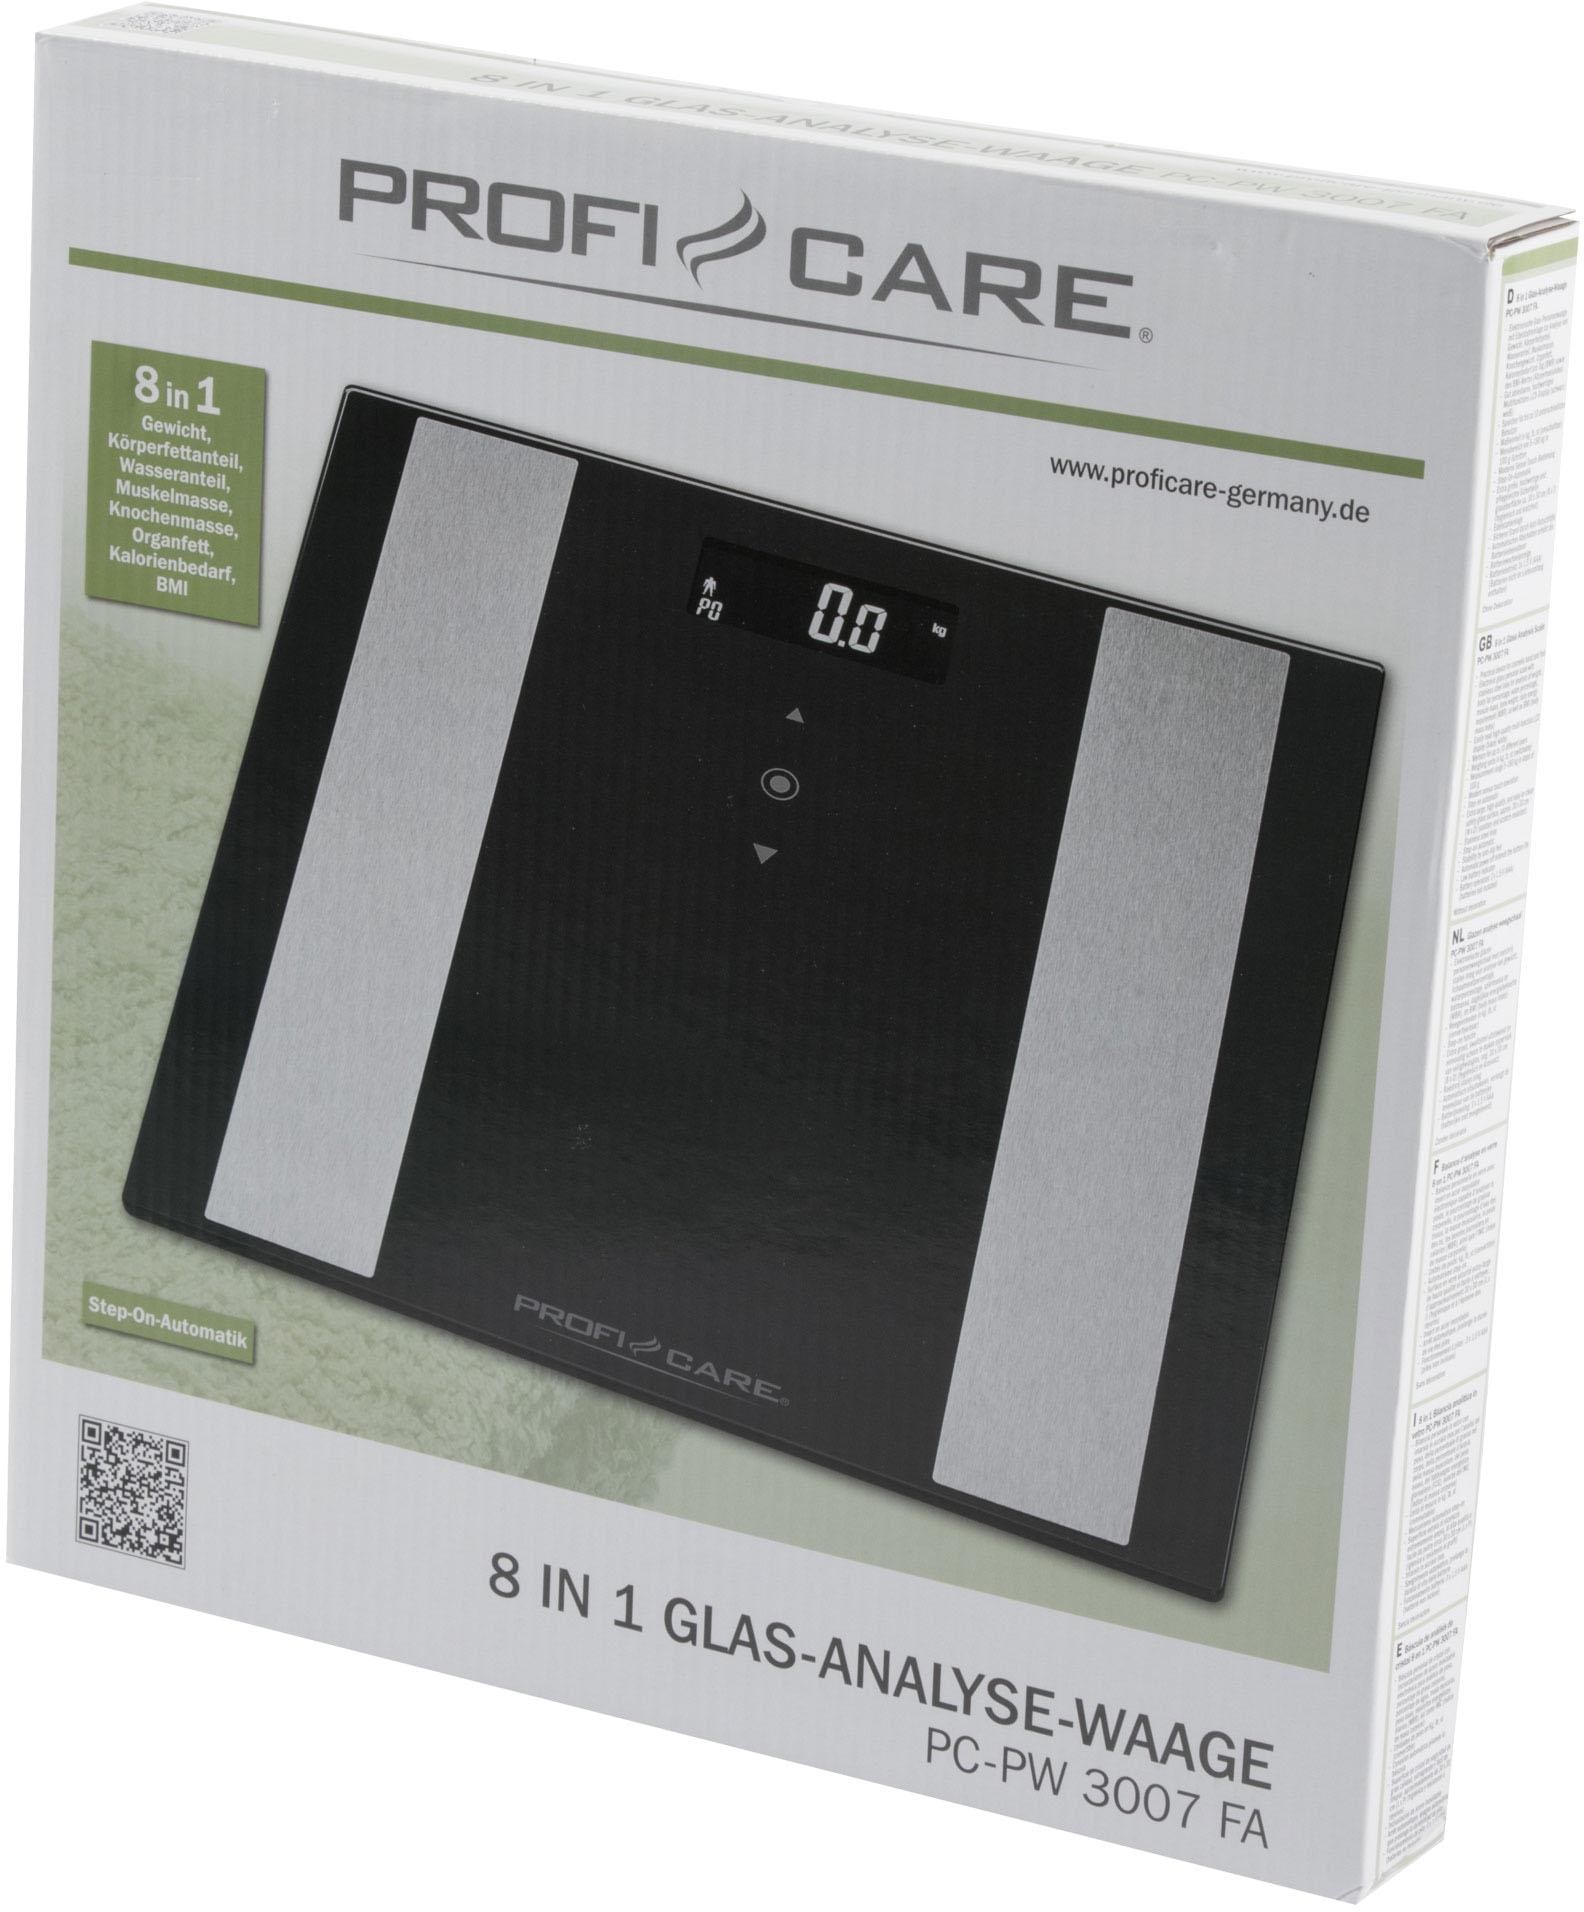 ProfiCare Körper-Analyse-Waage »PC-PW 3007 FA«, 8 in 1 Glas-Analyse-Waage in 2 Farben